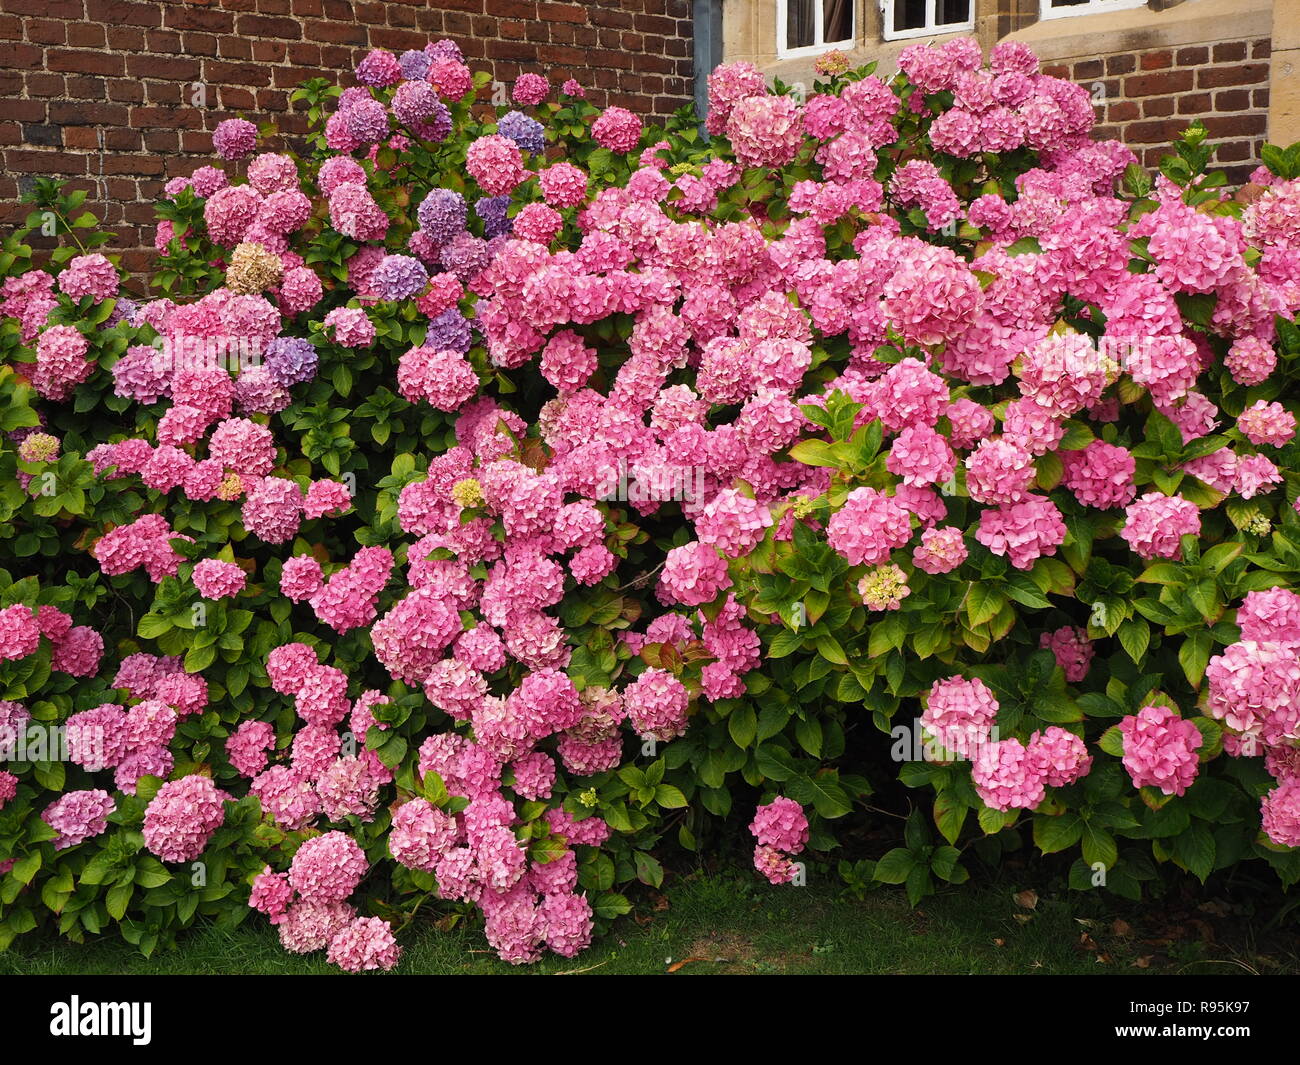 Abundant pink flowers on a Hydrangea bush in front of a house Stock Photo